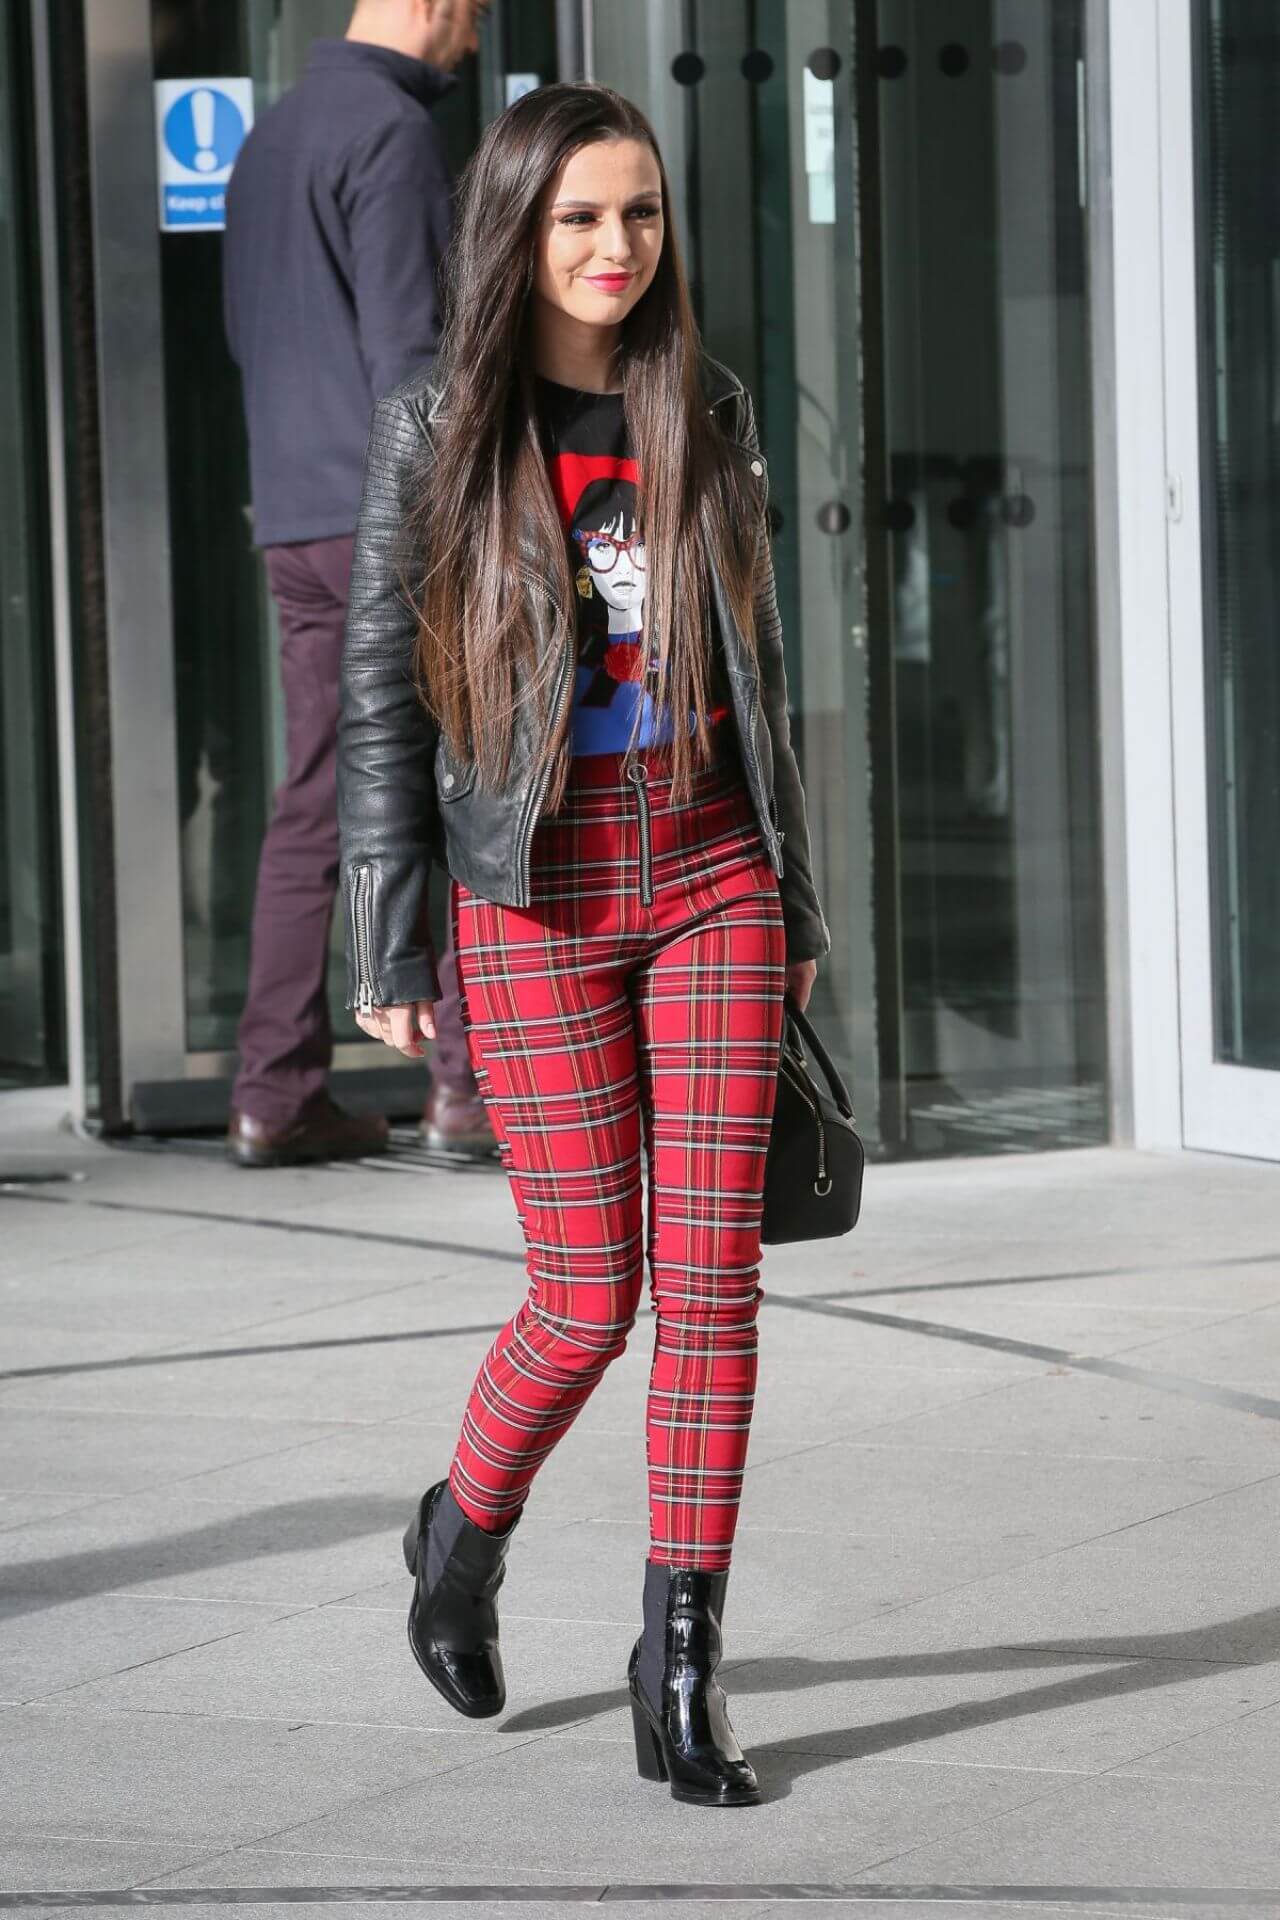 Cher Lloyd Gorgeous Looks In Black Leather Jacket Under T-shirt With Red Checked Pants Outfits